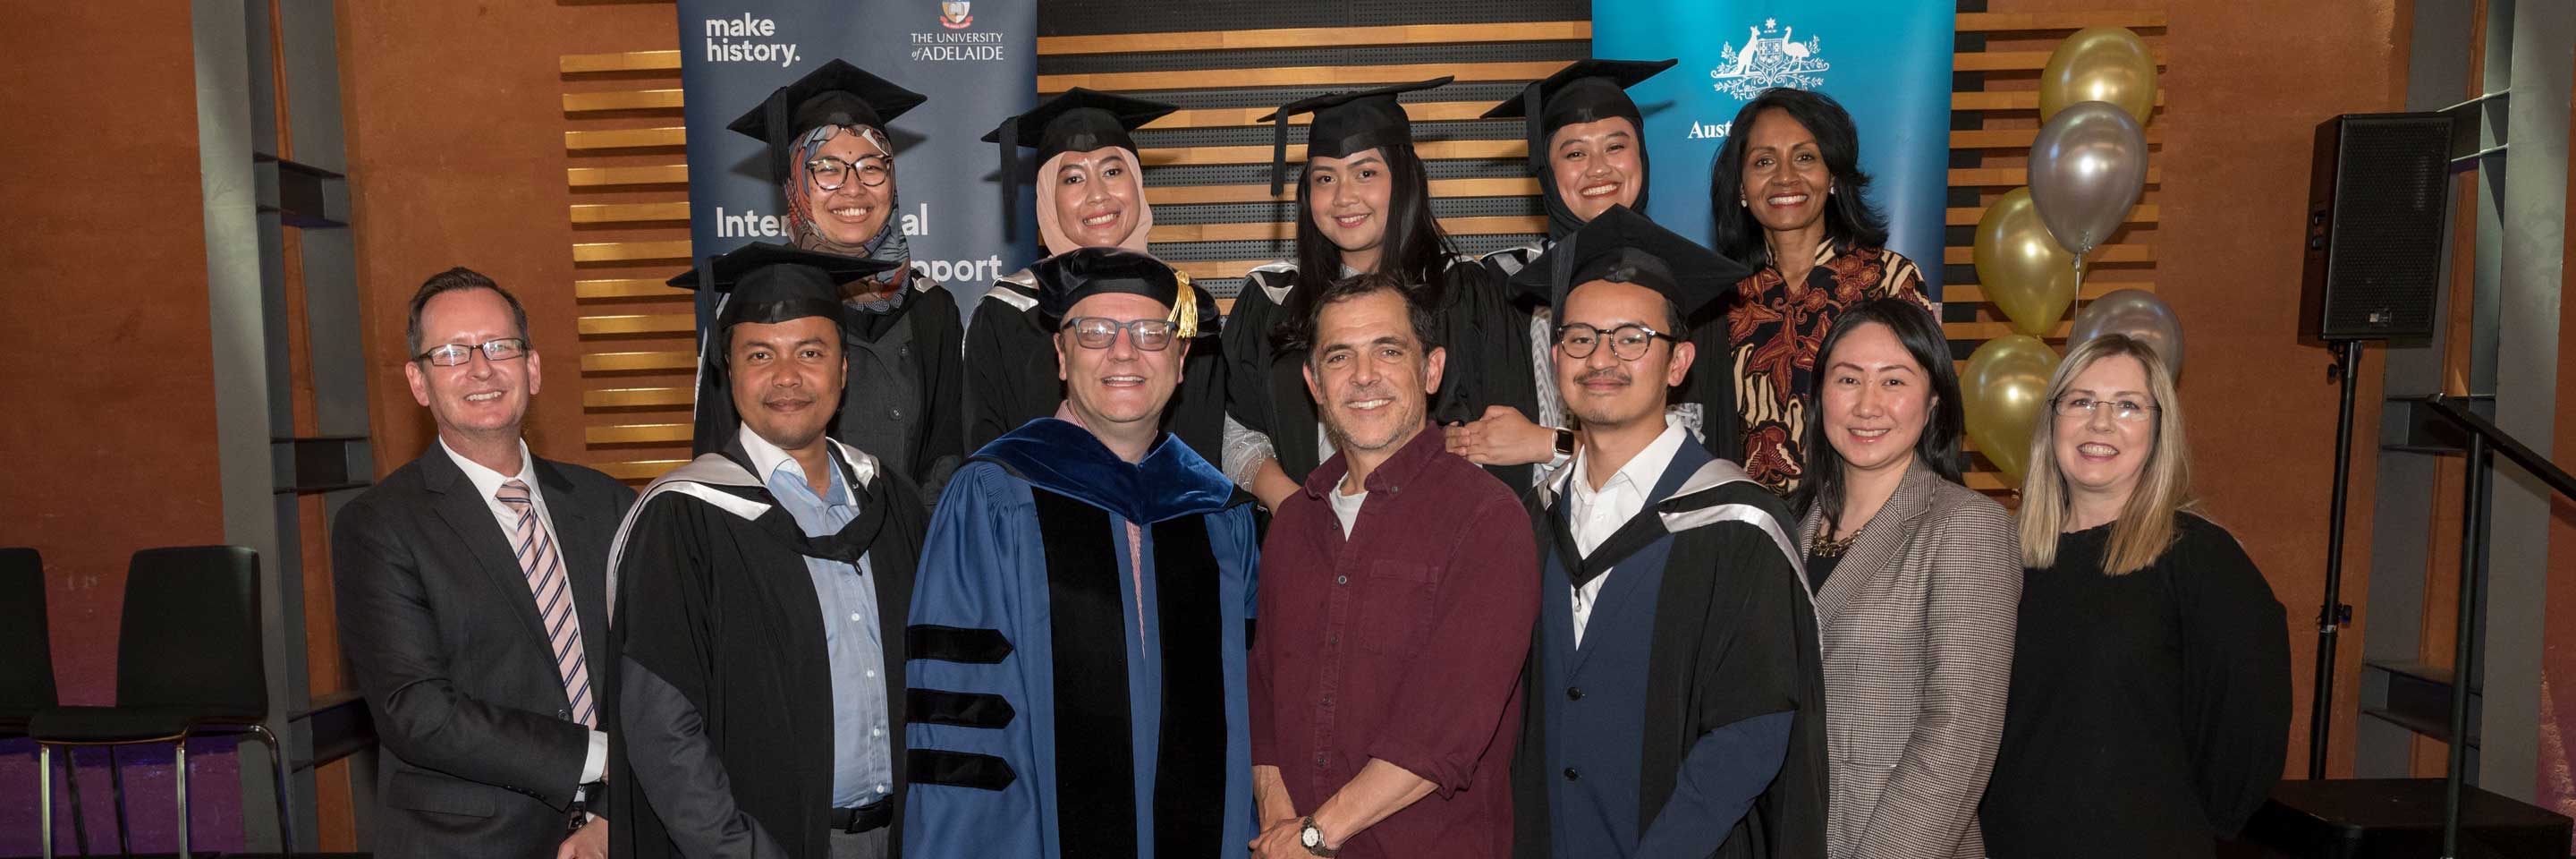 Our Split-Site Masters Program (SSMP) scholars celebrate graduation from the University of Adelaide. The SSMP consists of 12 months of study at an Indonesian university, followed by 12 months at an Australian university, leading to awarding of two related